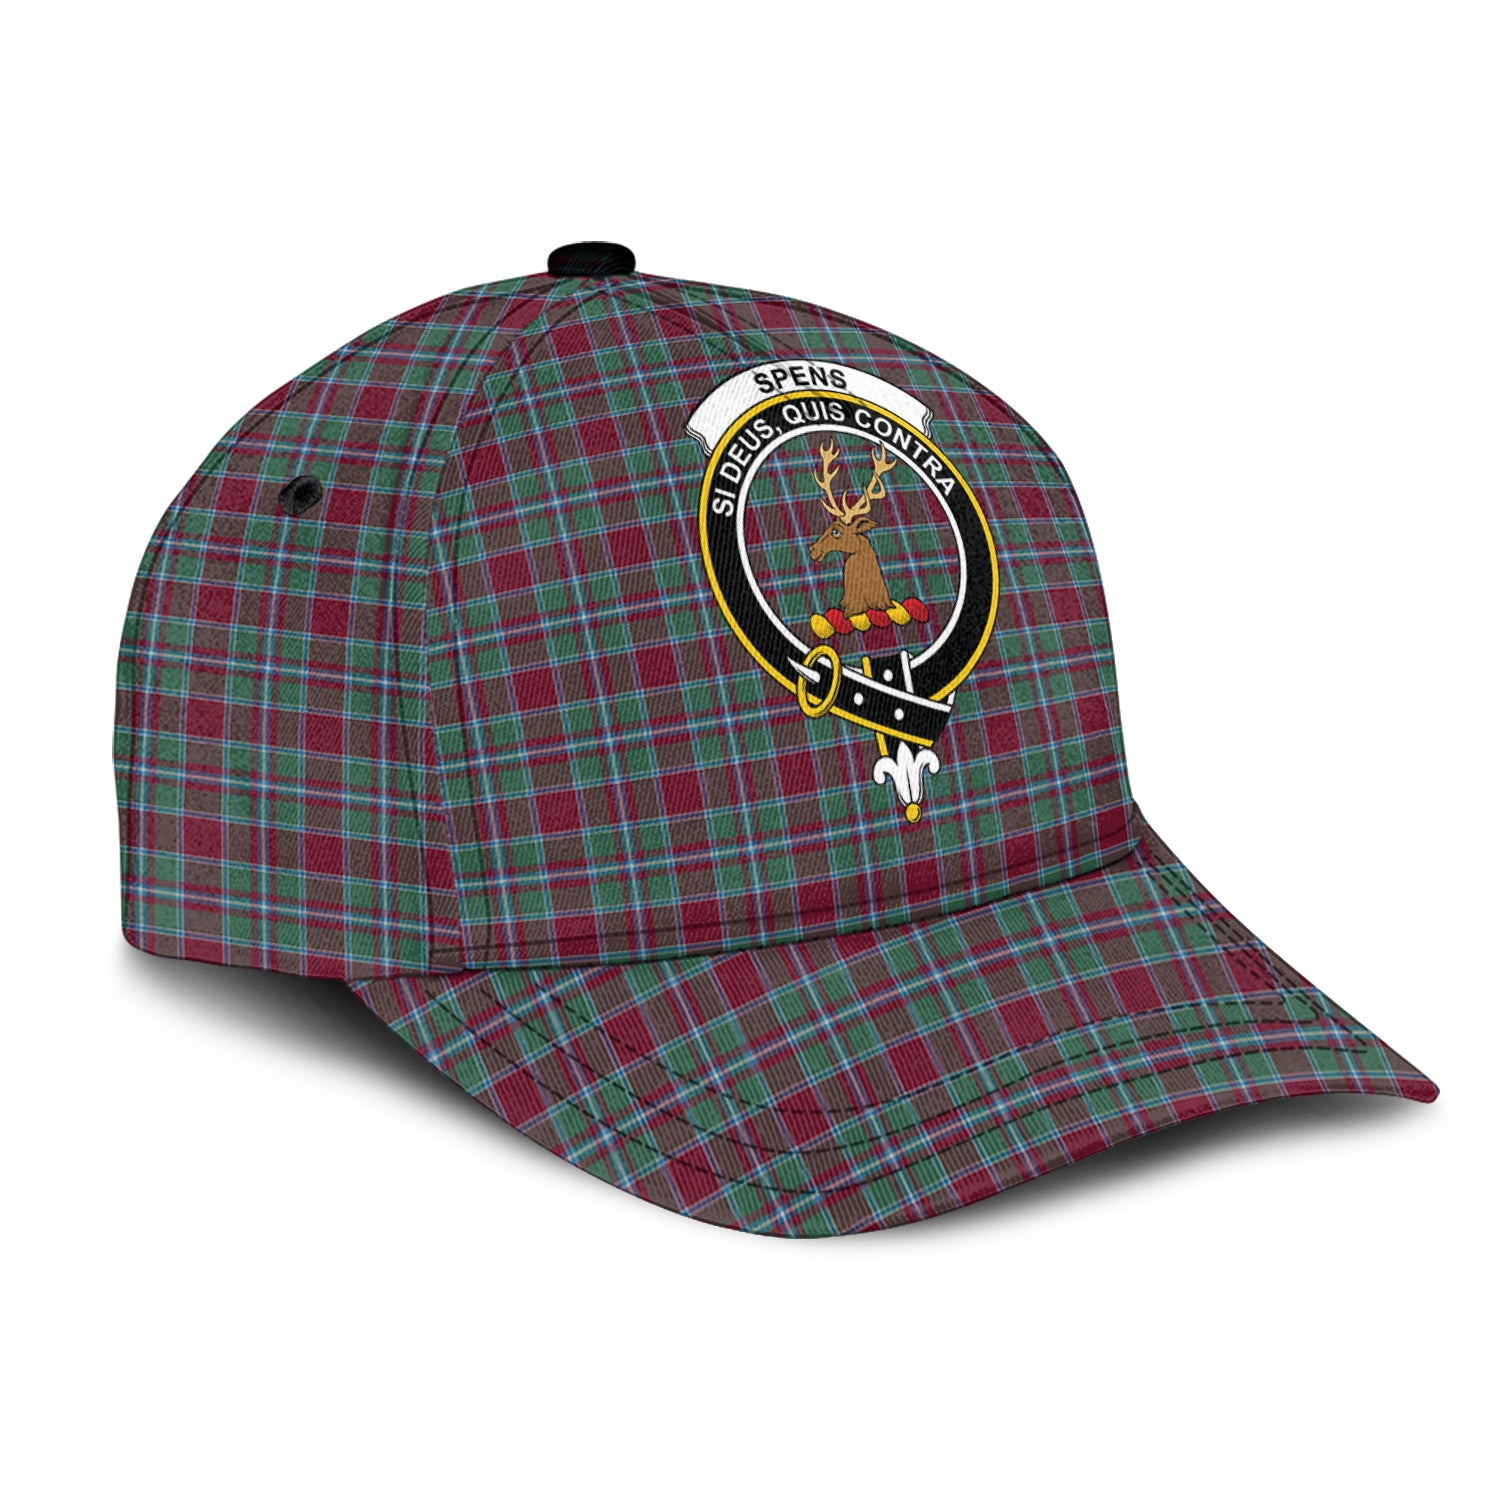 spens-spence-tartan-classic-cap-with-family-crest